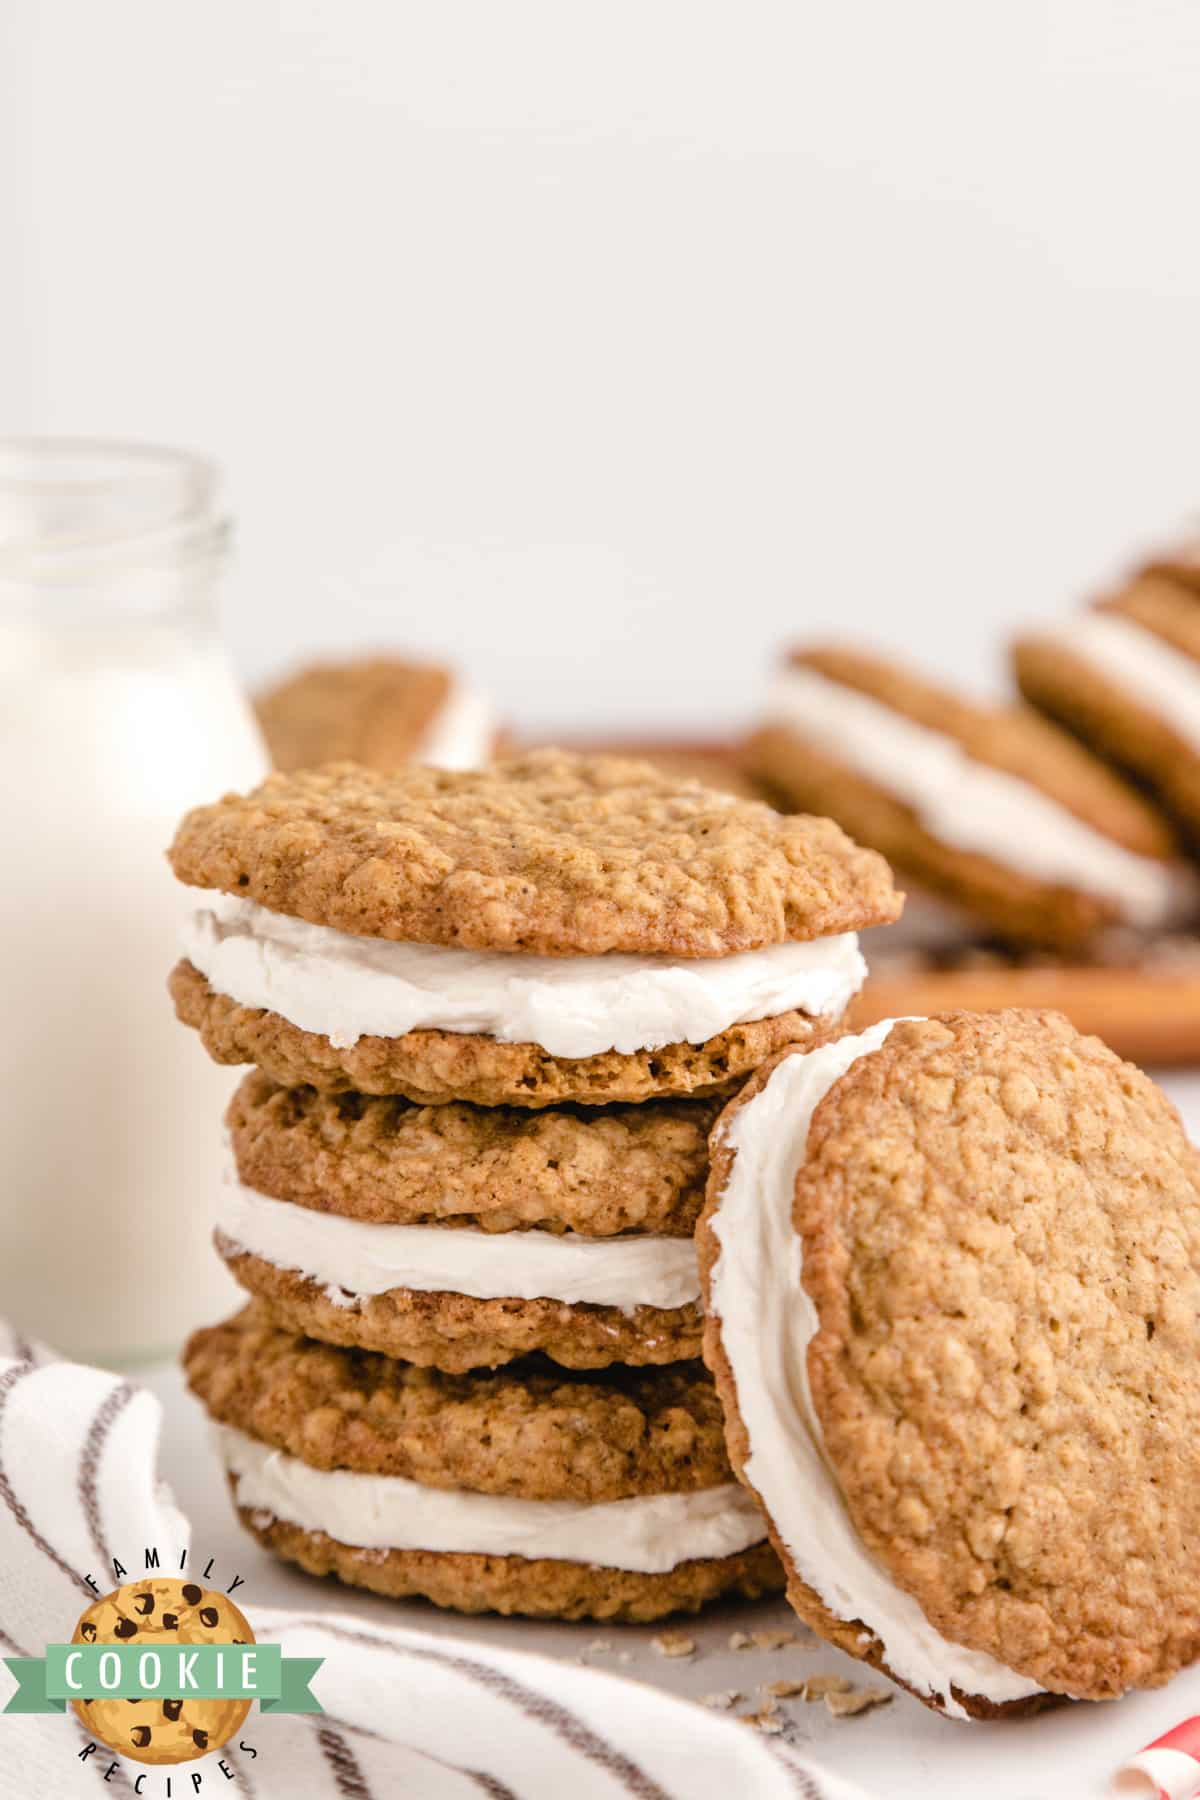 Homemade Oatmeal Cream Pies are made with a delicious creamy filling that is sandwiched between two soft and chewy oatmeal cookies. Even better than the store-bought variety that we all know and love!